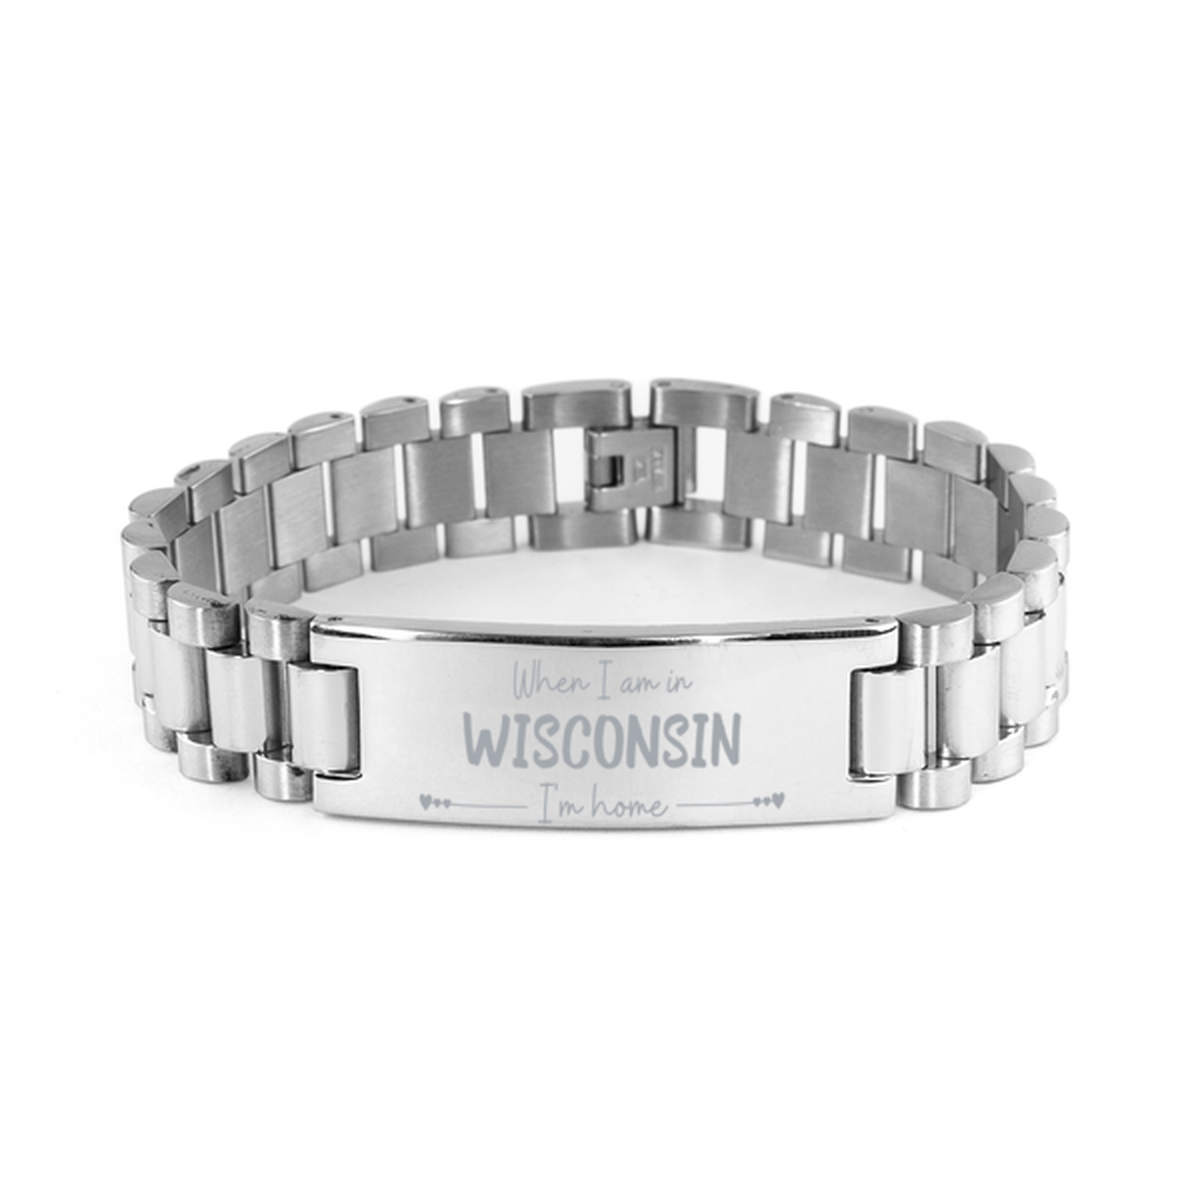 When I am in Wisconsin I'm home Ladder Stainless Steel Bracelet, Cheap Gifts For Wisconsin, State Wisconsin Birthday Gifts for Friends Coworker